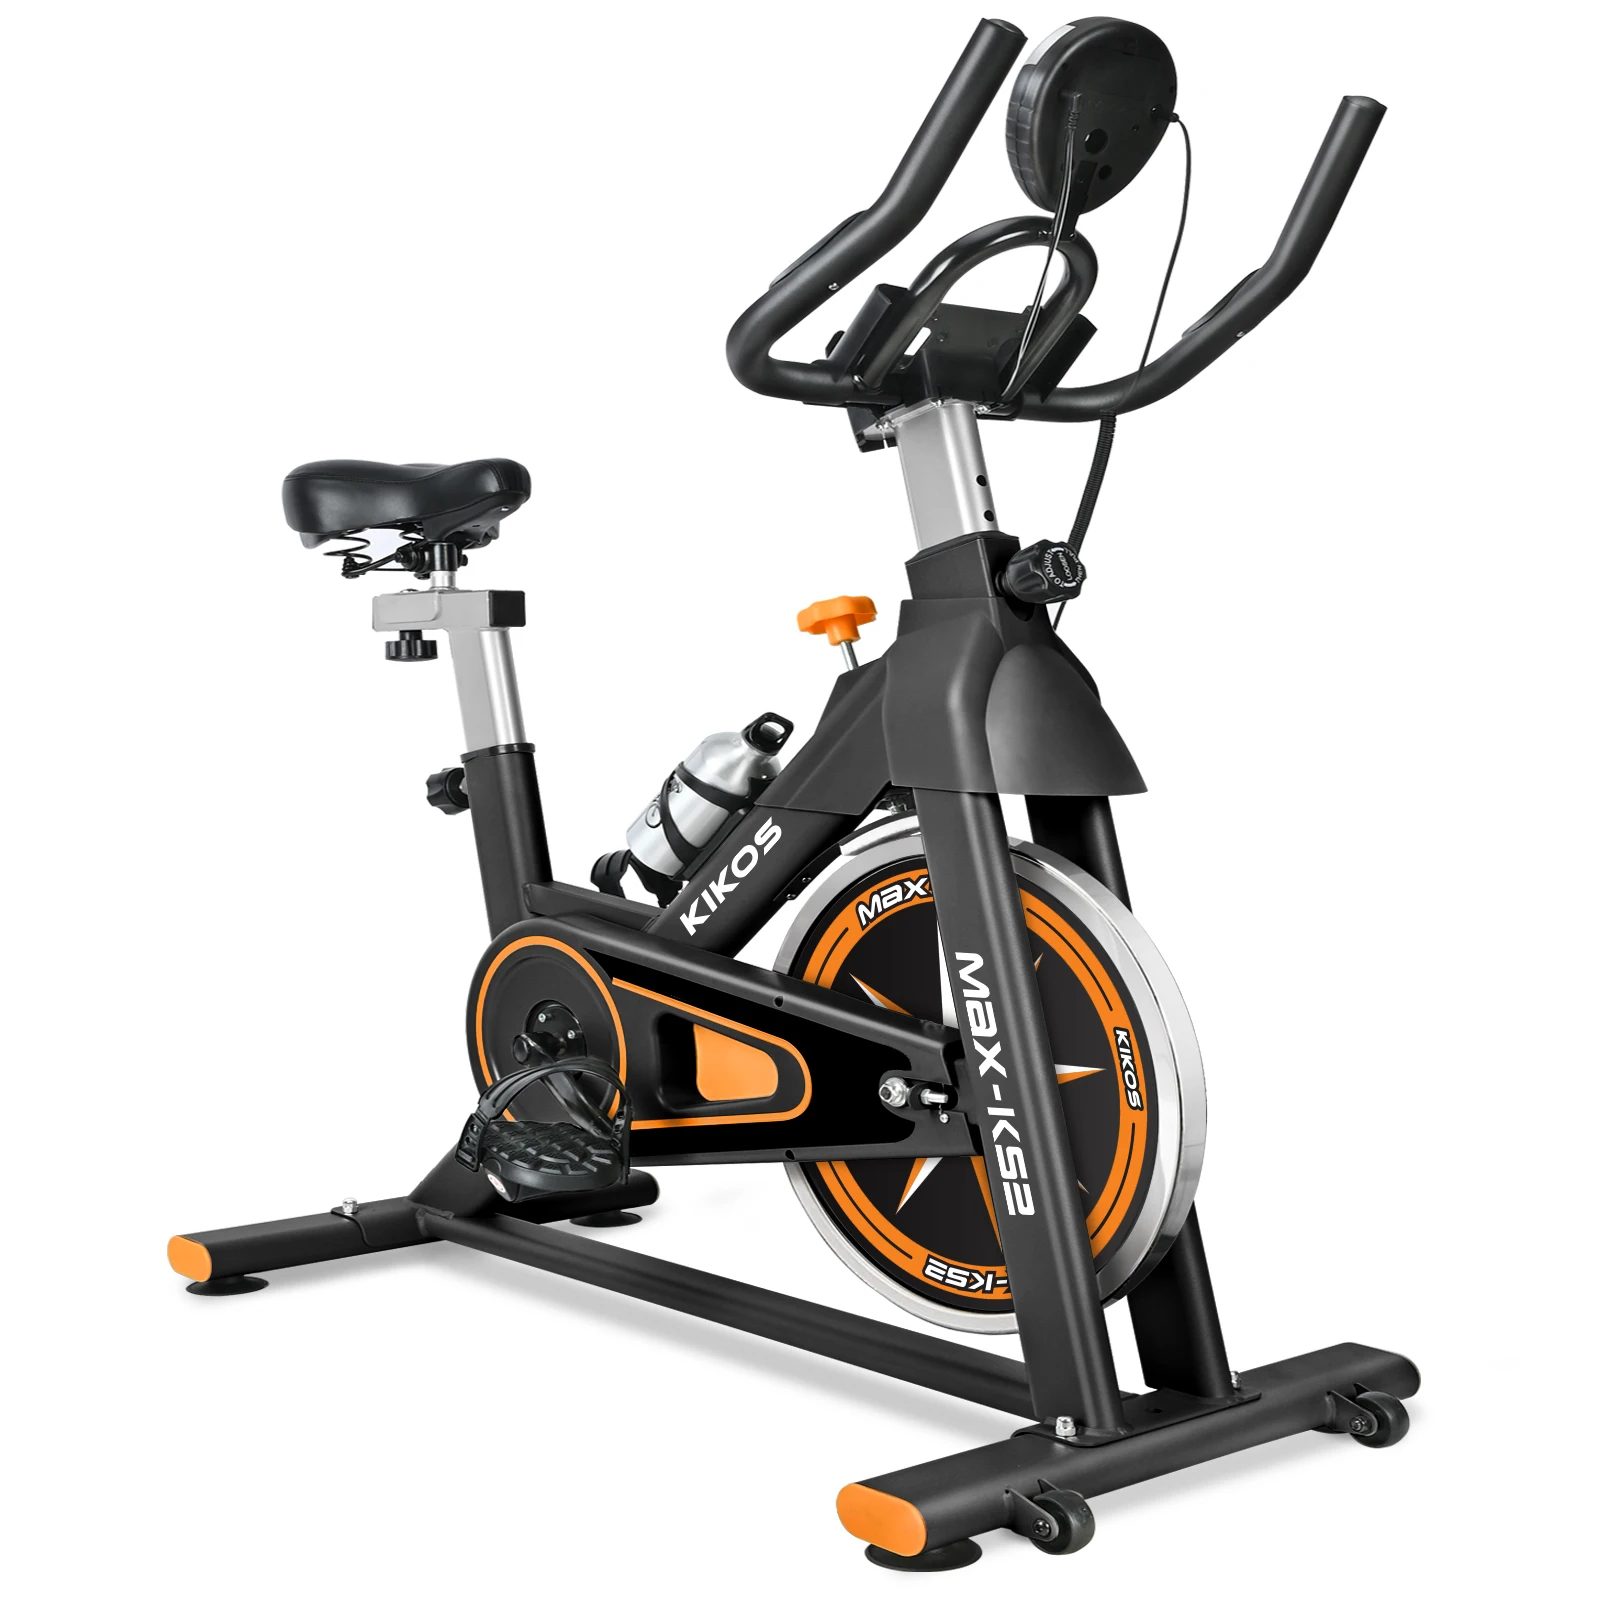 cash autobiography vein Spinning Indoor Ultra Quiet Exercise Bike Weight Loss Bikes For Exercise  For Home Gym Cardio Workout Training - Buy Lightweight Exercise Bike,Indoor  Fitness Equipment,Spin Bike Product on Alibaba.com